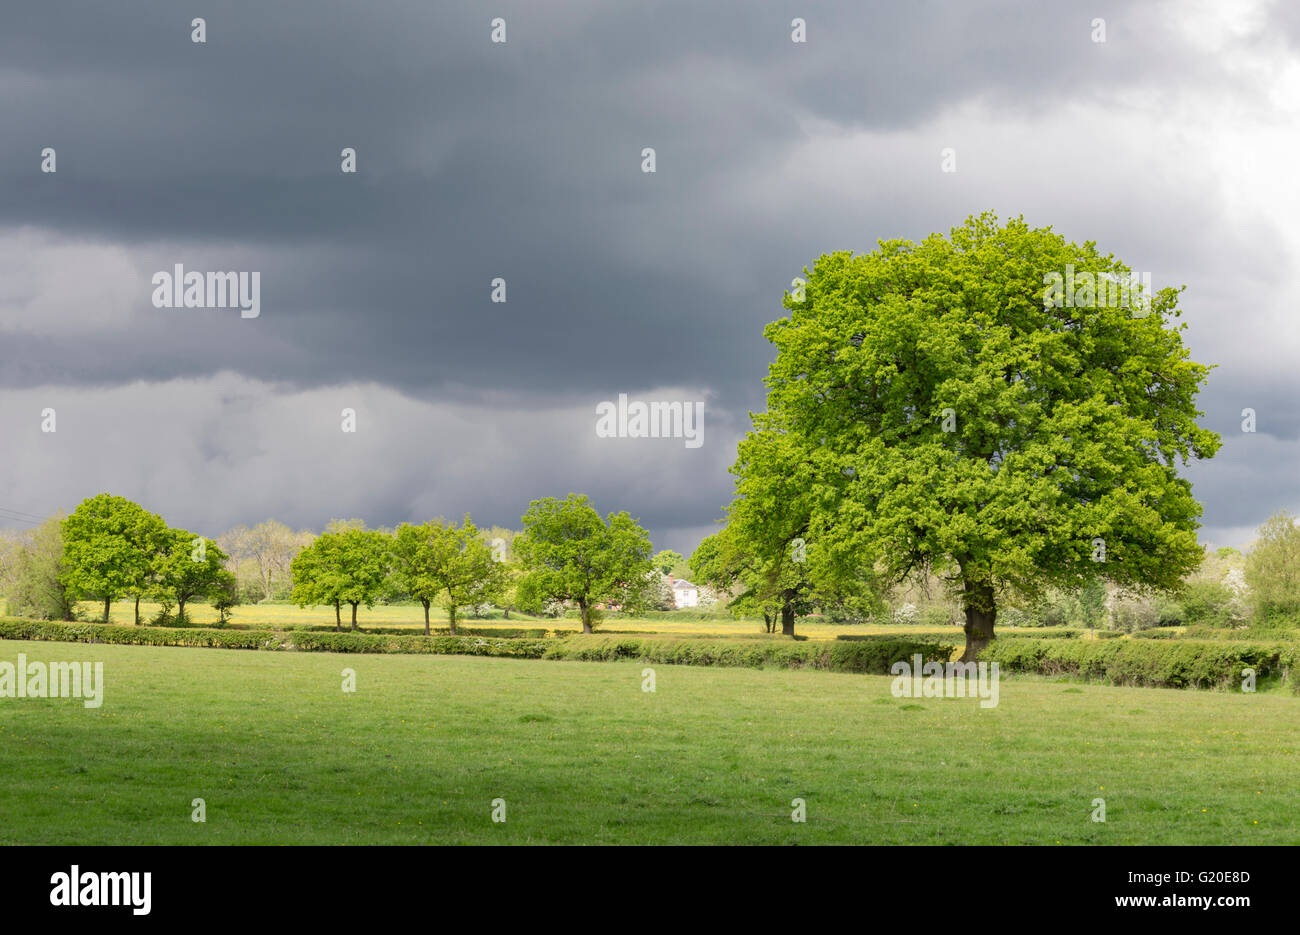 Storm clouds over an English landscape, England, UK Stock Photo